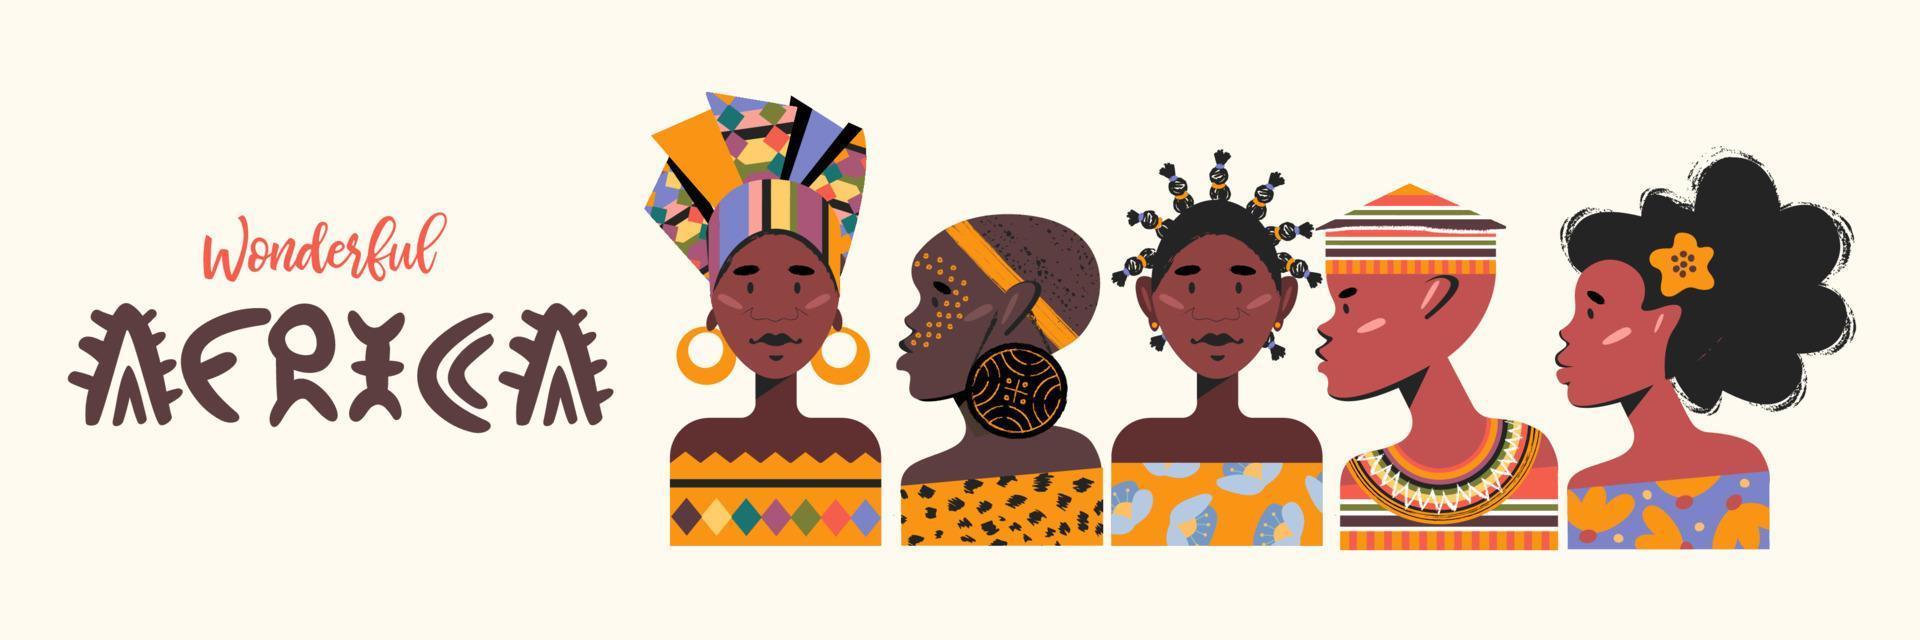 Wonderful Africa. Colorful vector illustration on a white background.